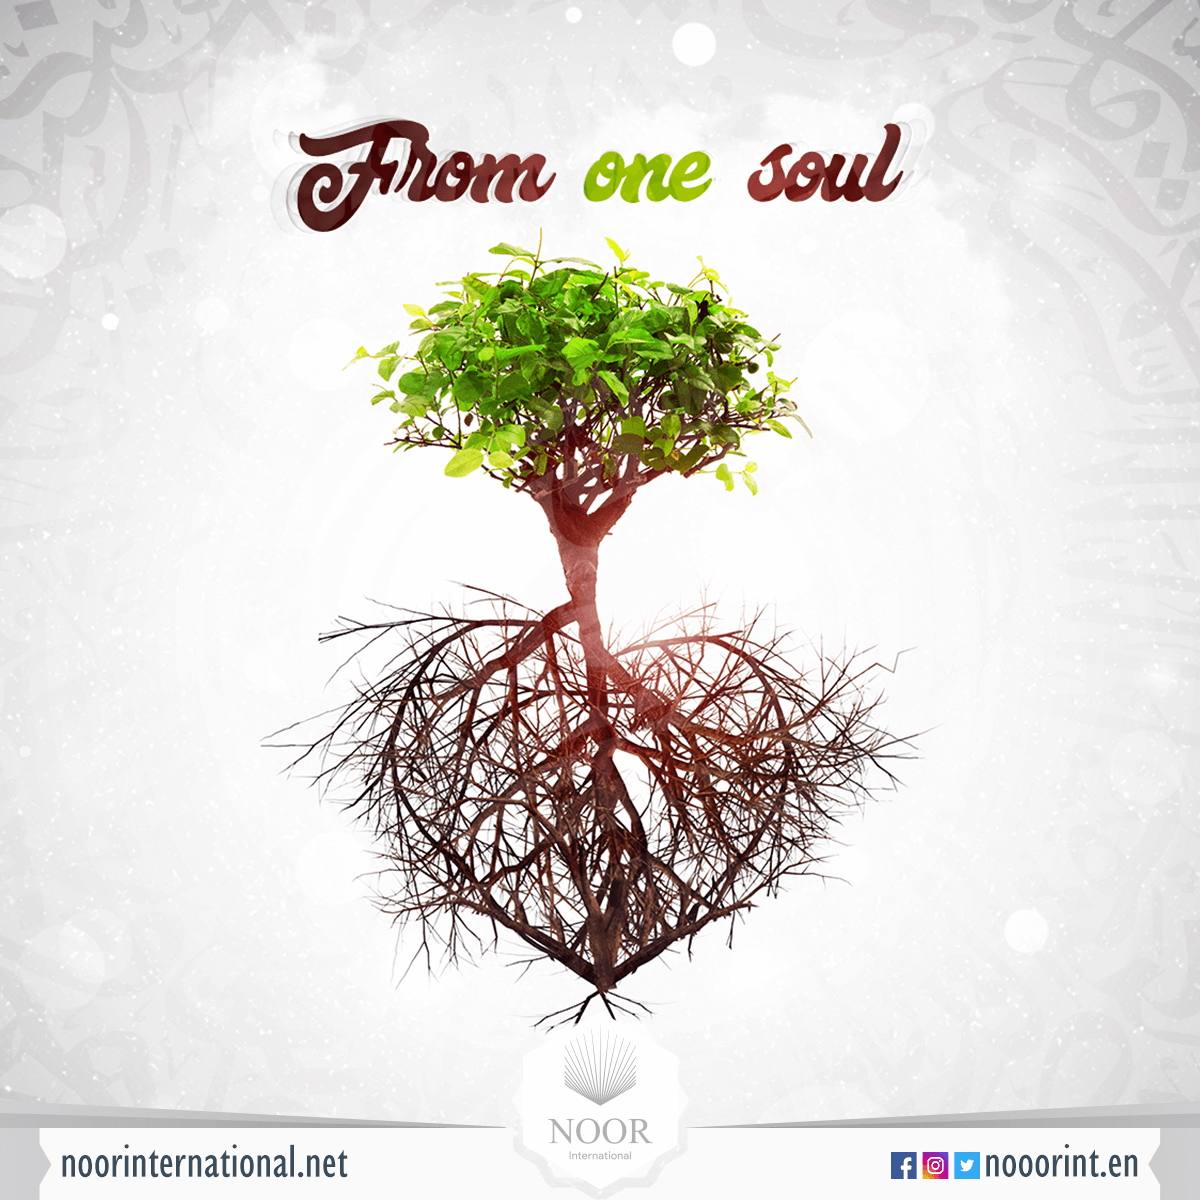 From one soul